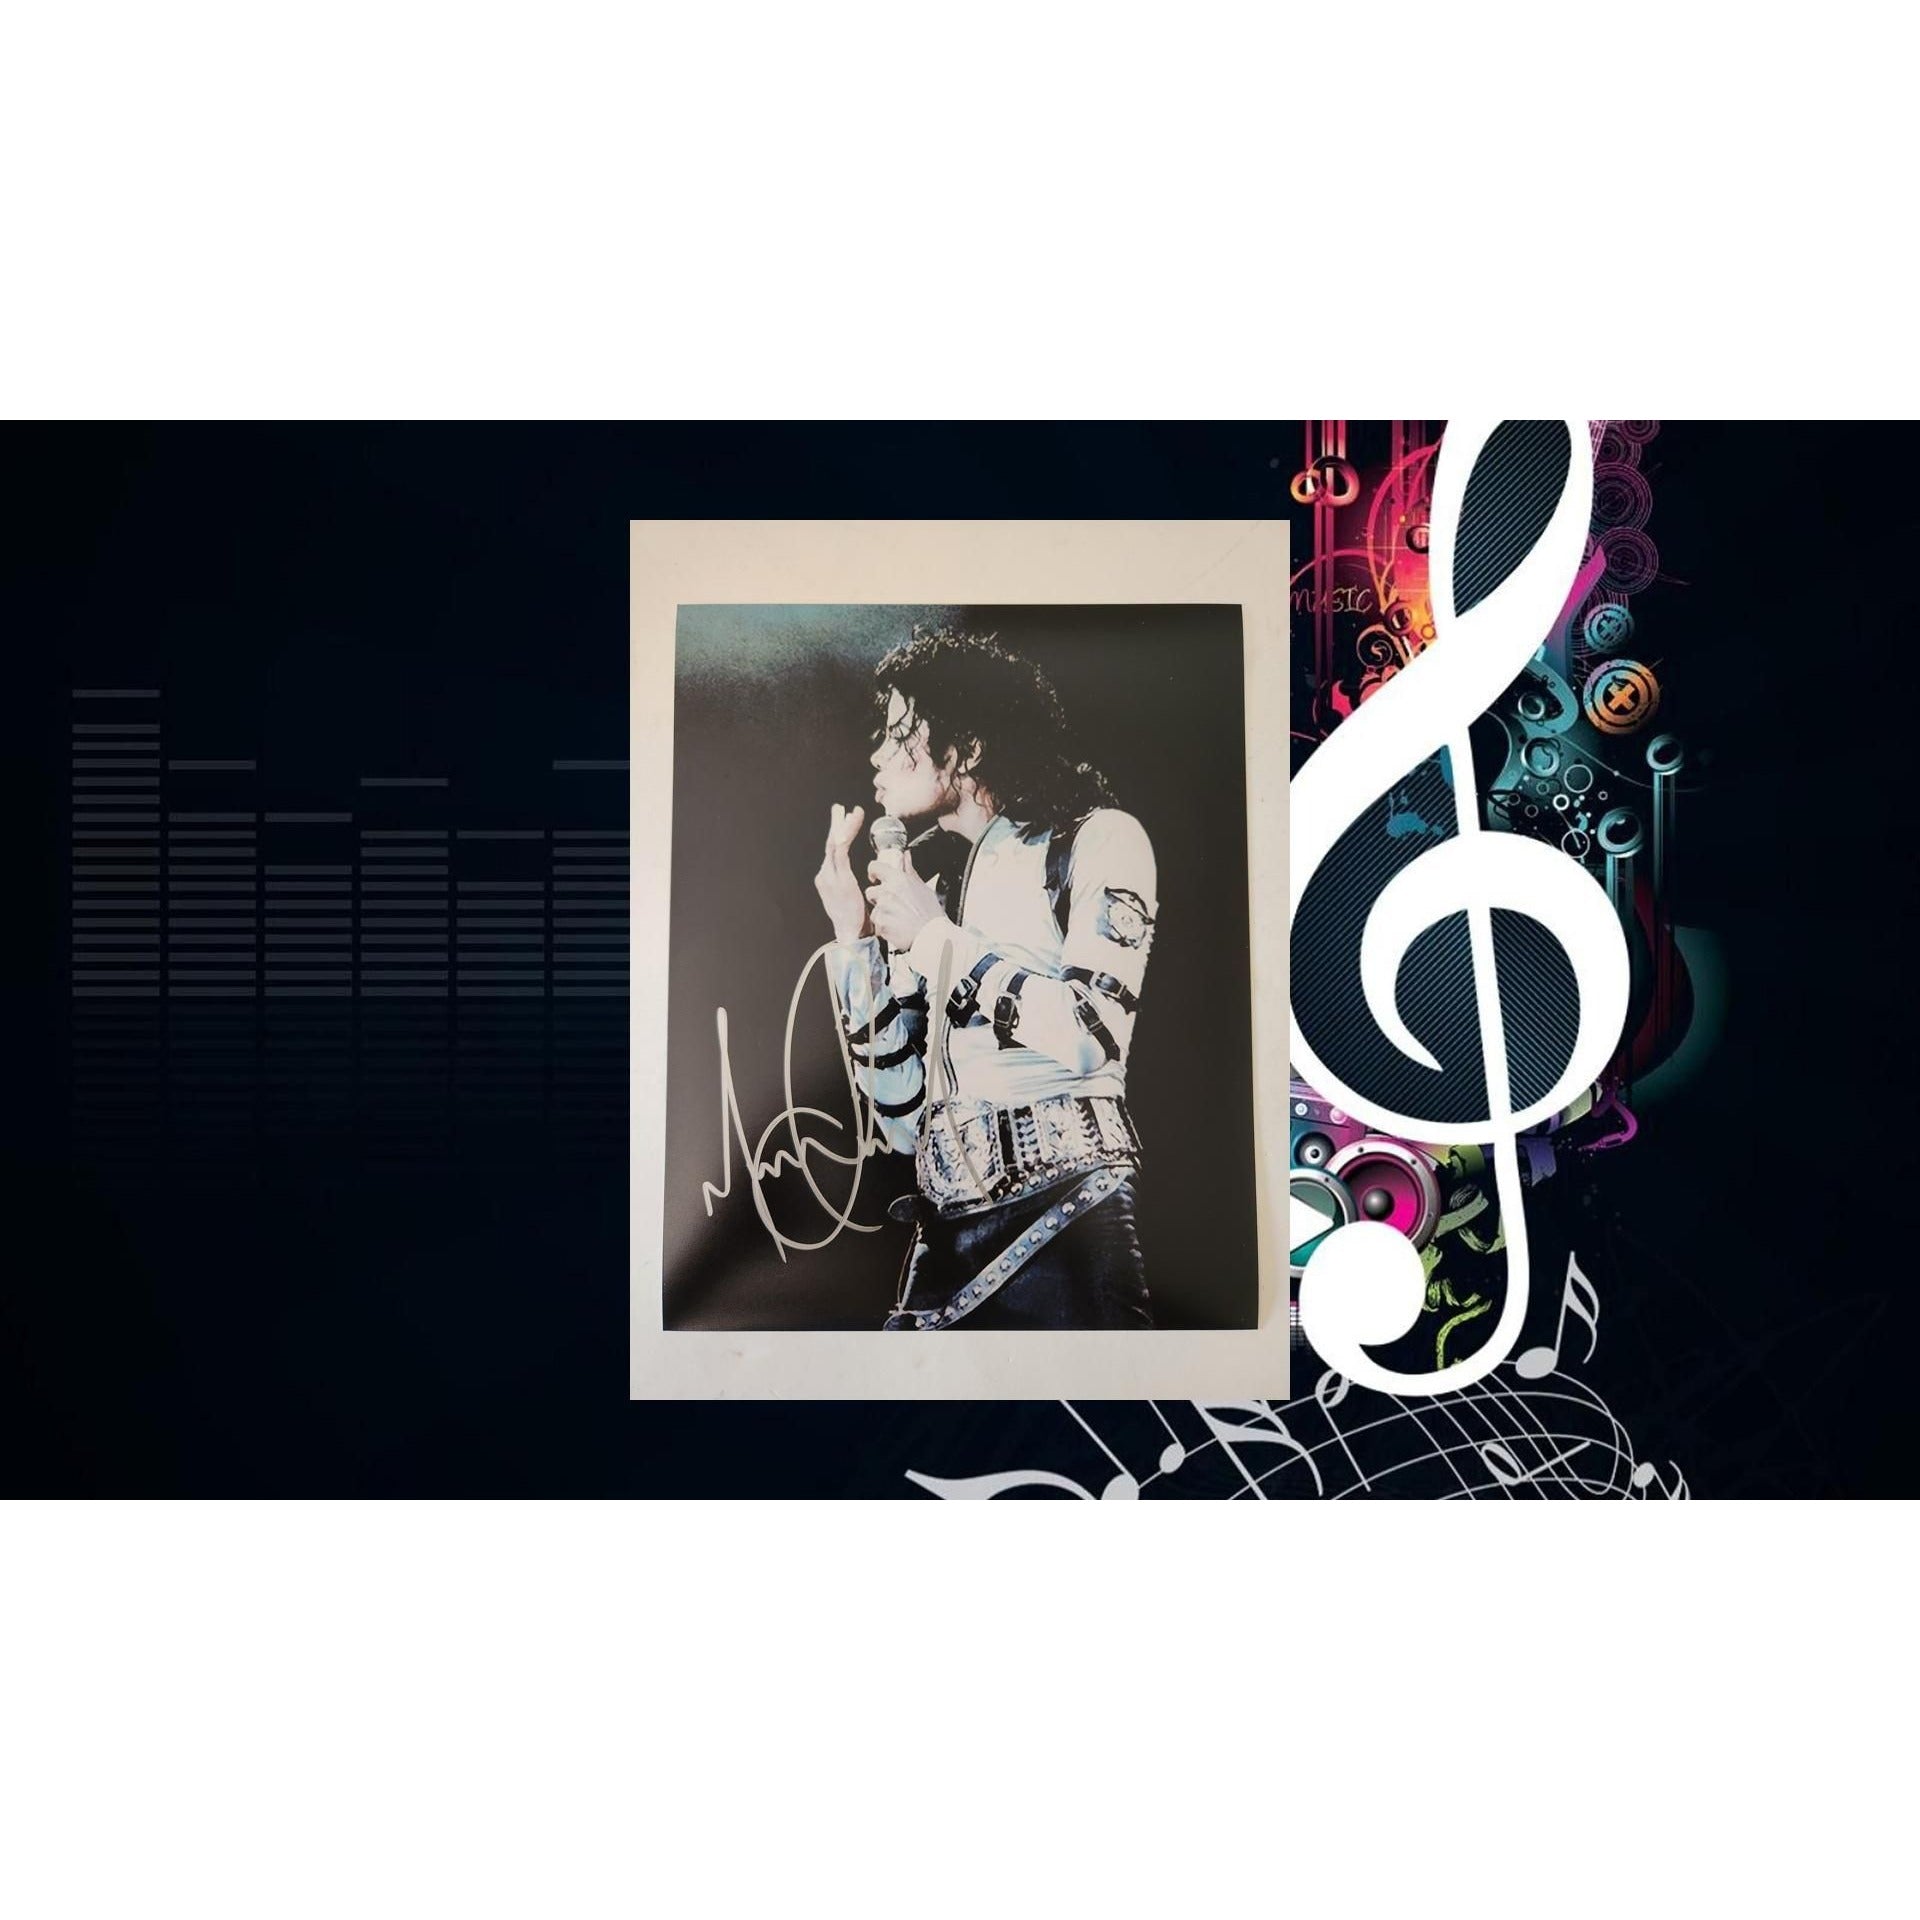 Michael Jackson the King of Pop 8x10 photo signed with proof